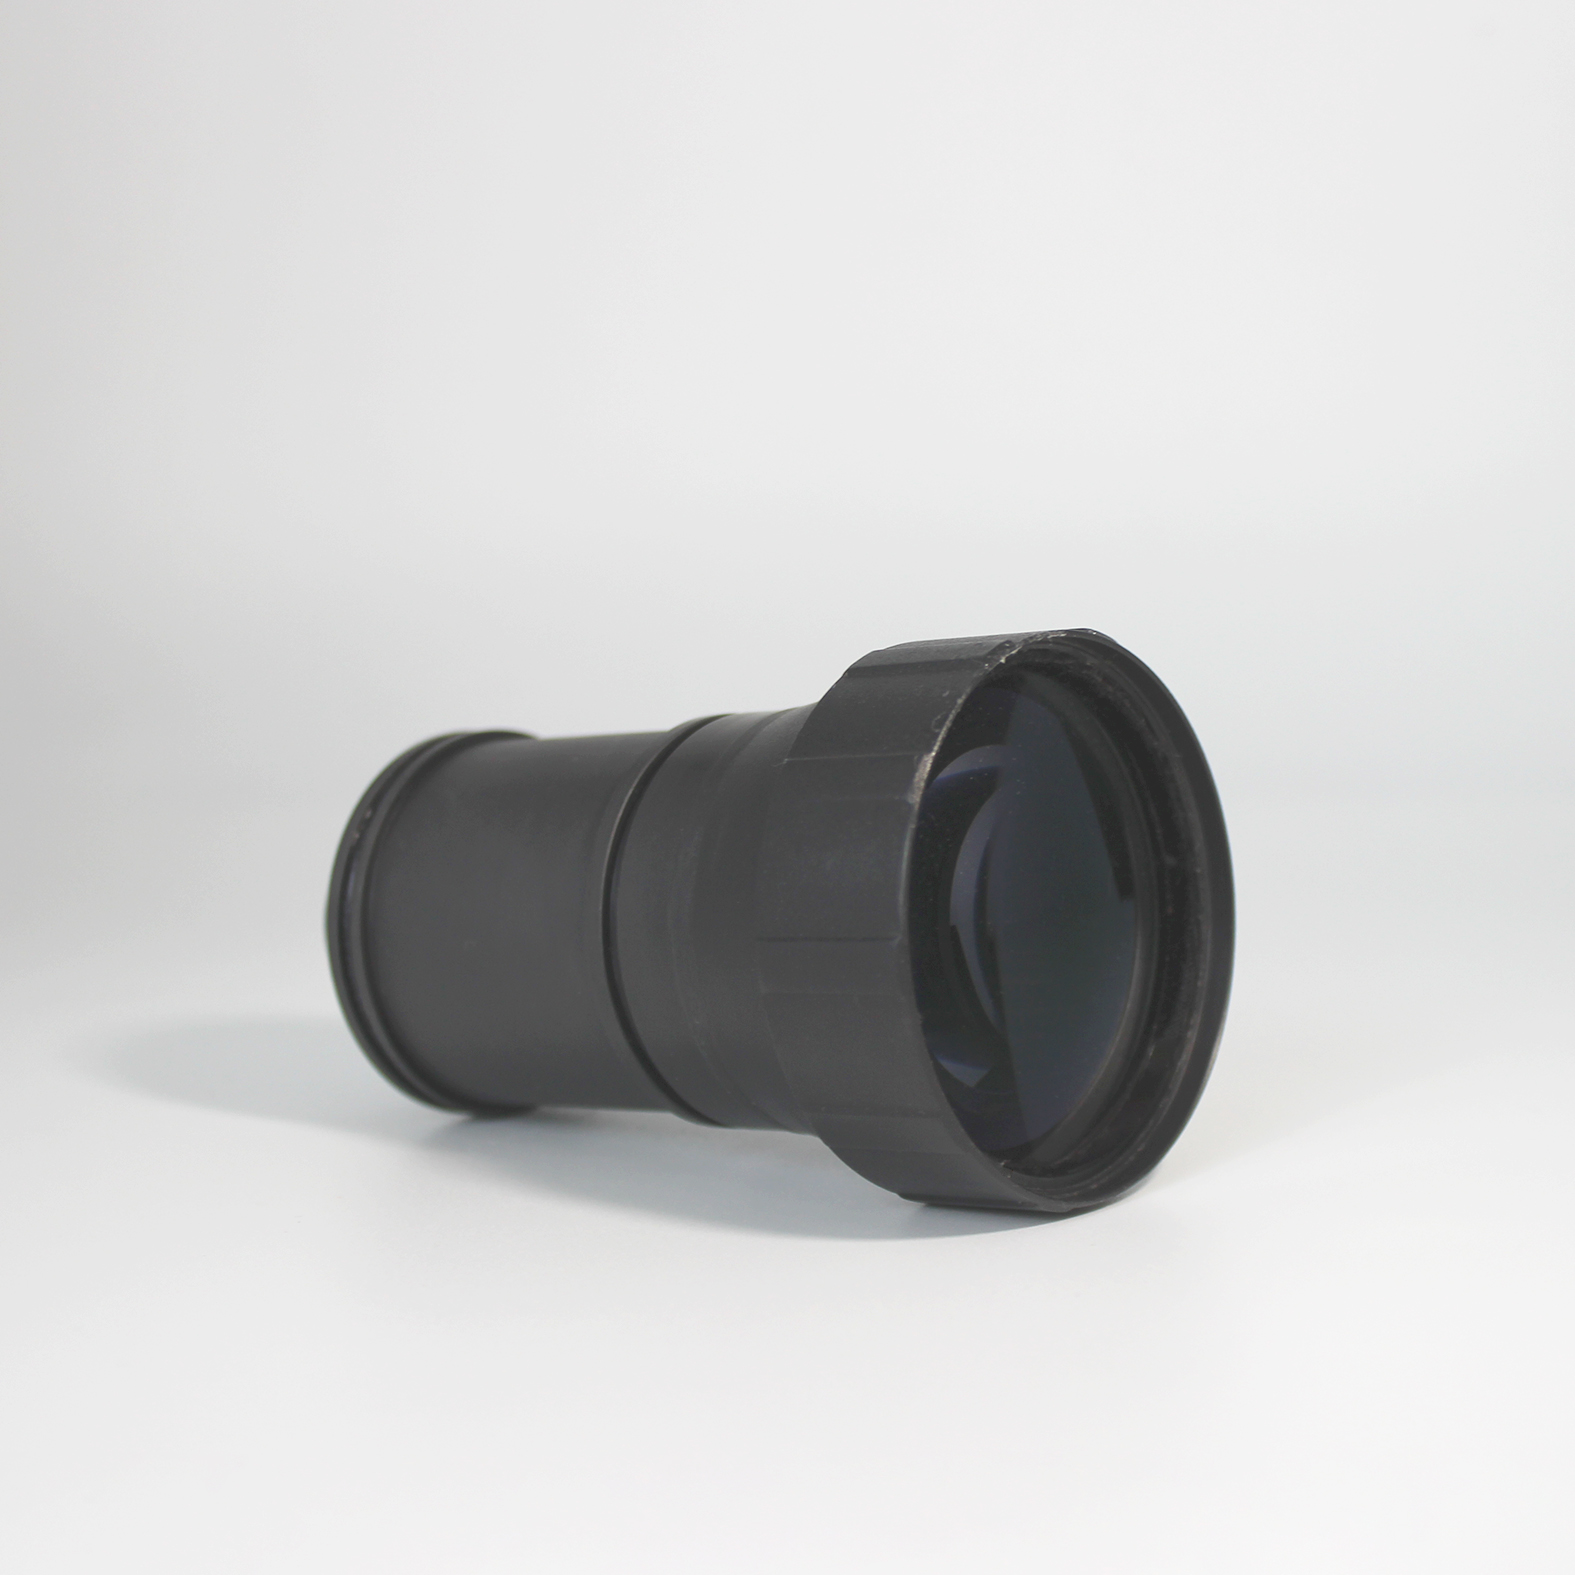 China Factory Monocular Telescope Direct Sale Low Light Night Vision Telephoto Lens